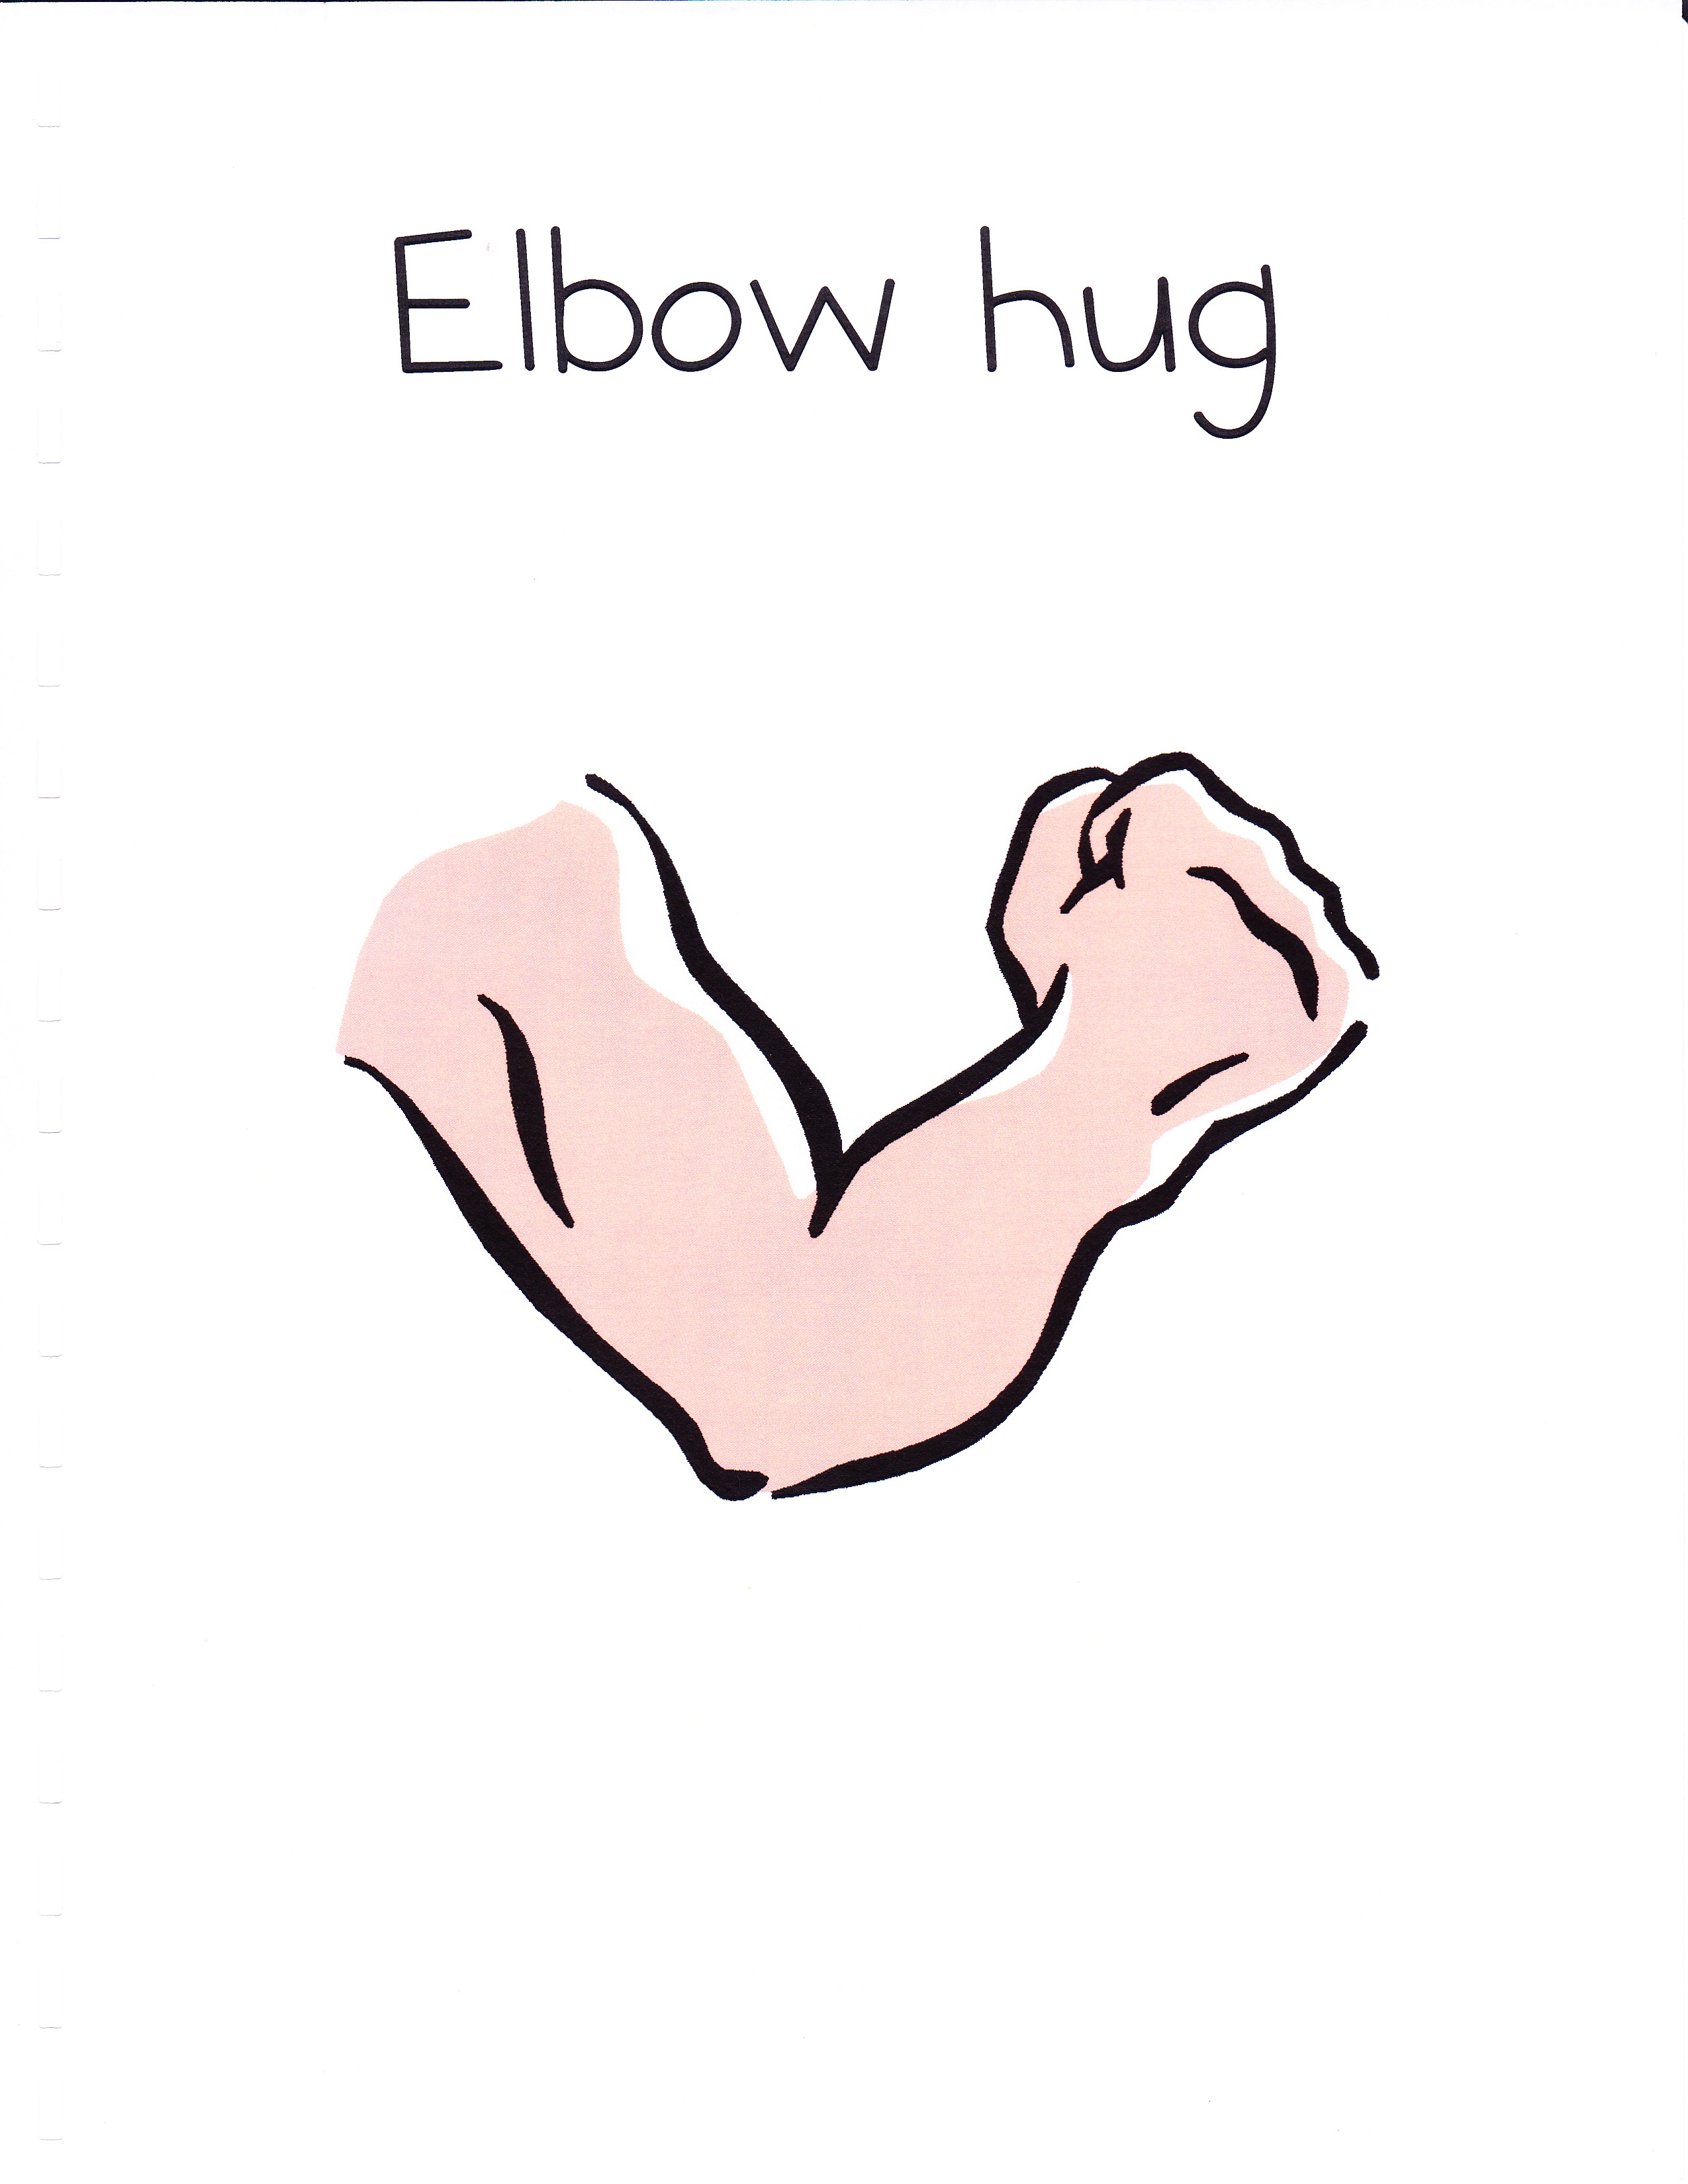 For An Elbow Hug The Partners Hook Their Right Arms Together At The